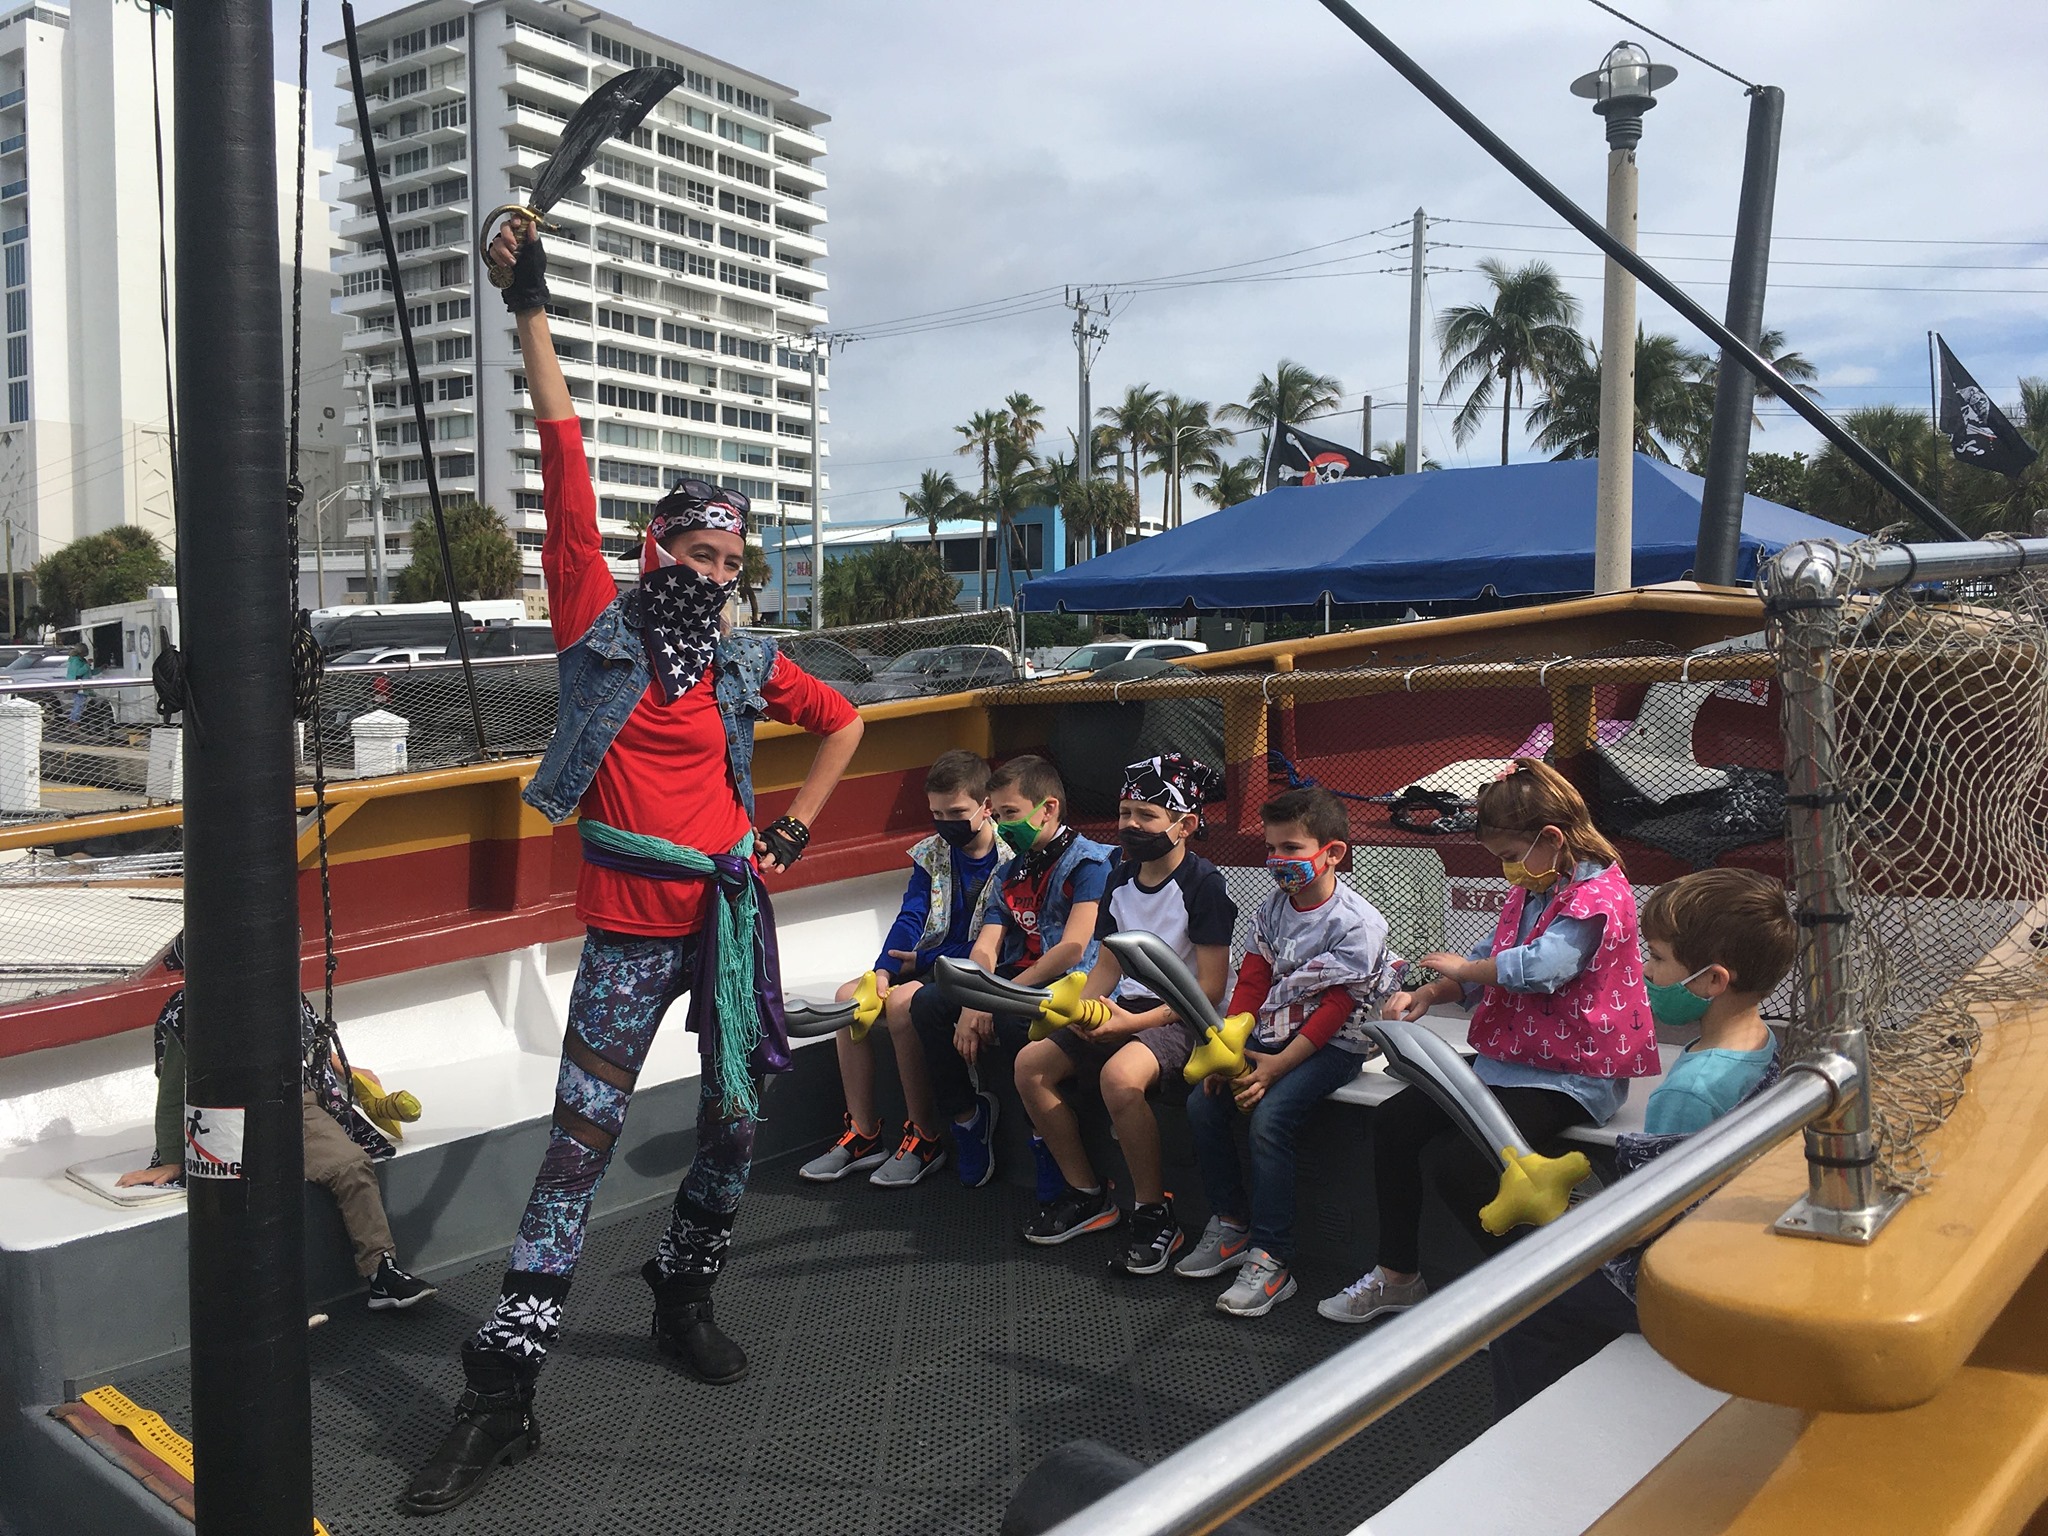 Pirate Cruise in Fort Lauderdale